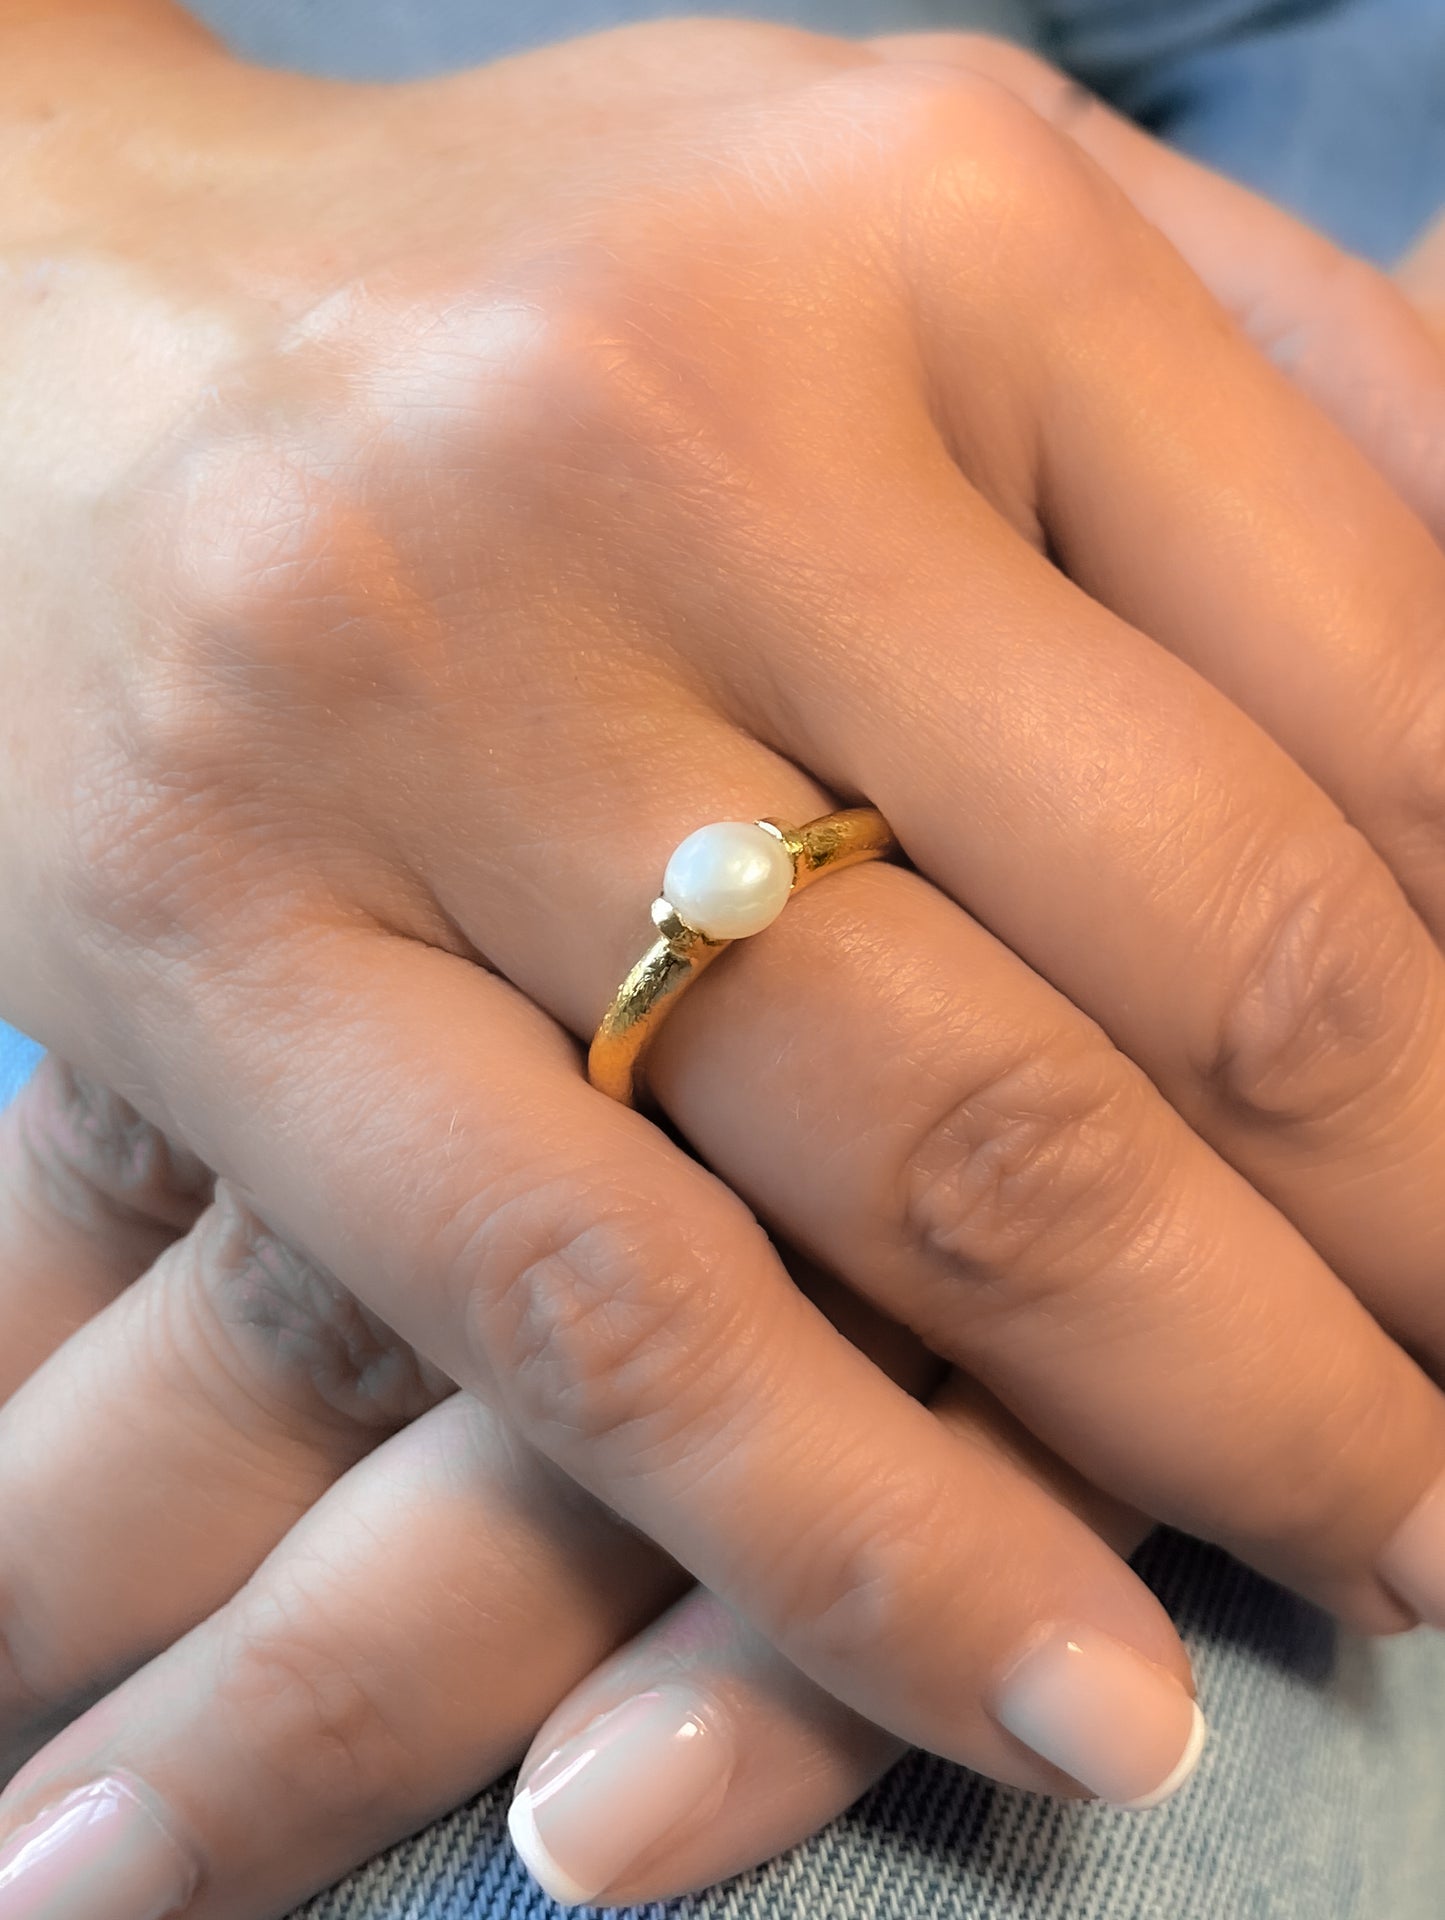 Matte gold ring with pearl